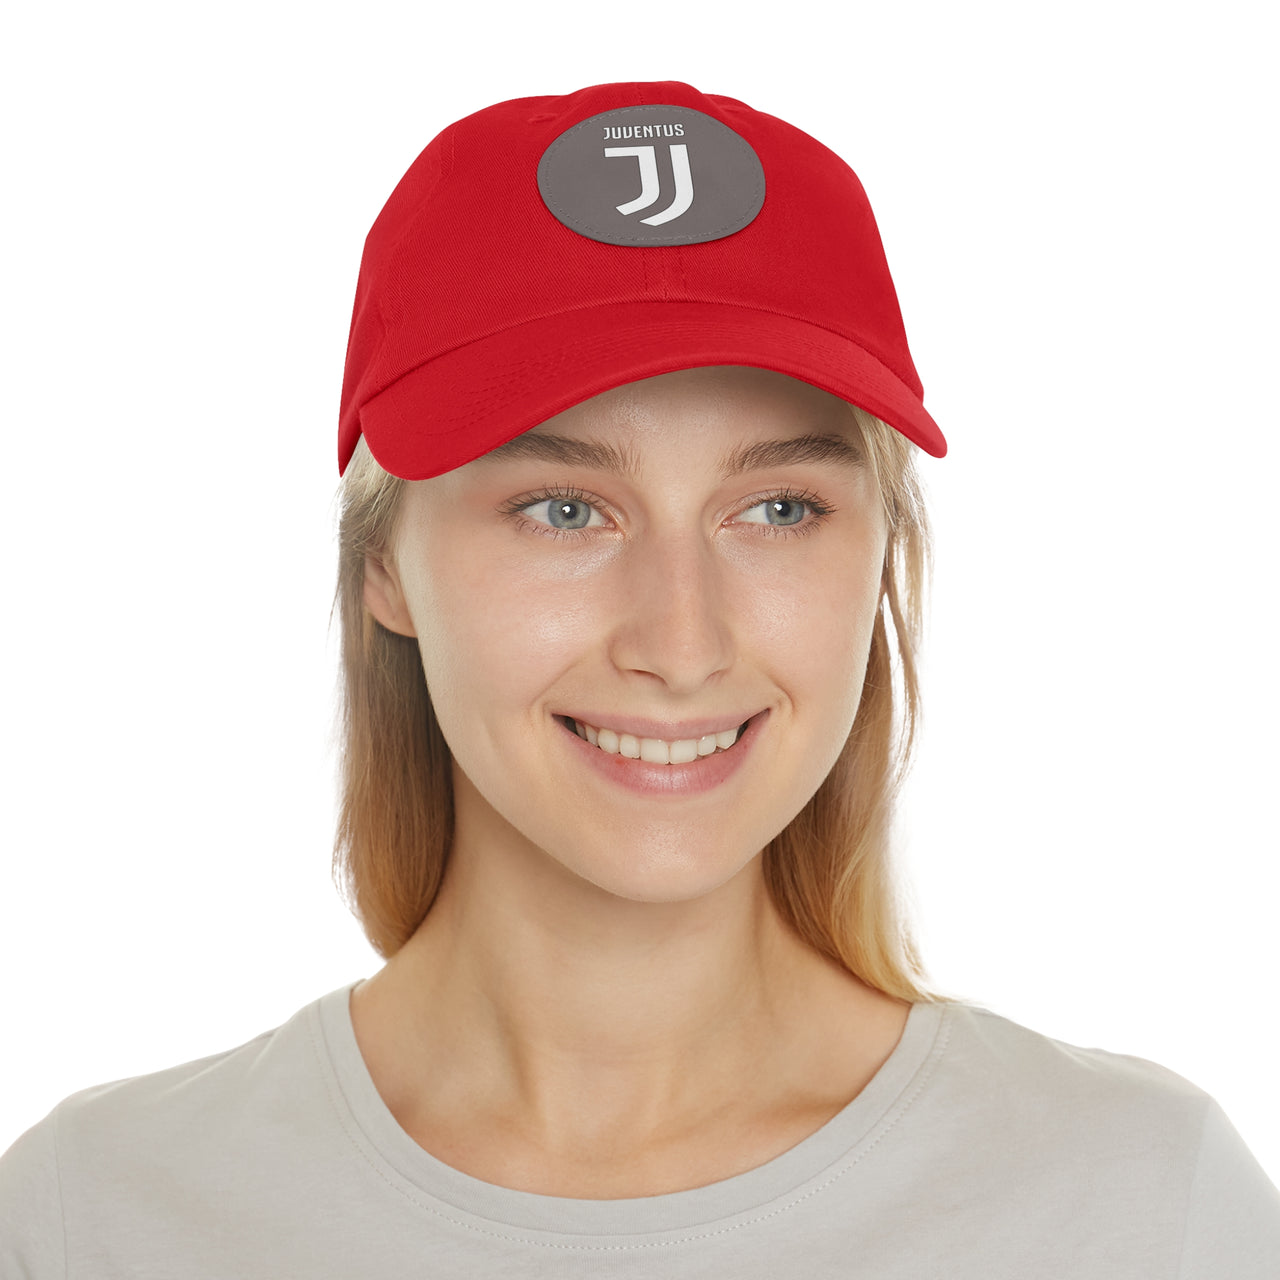 Juventus Dad Hat with Leather Patch (Round)